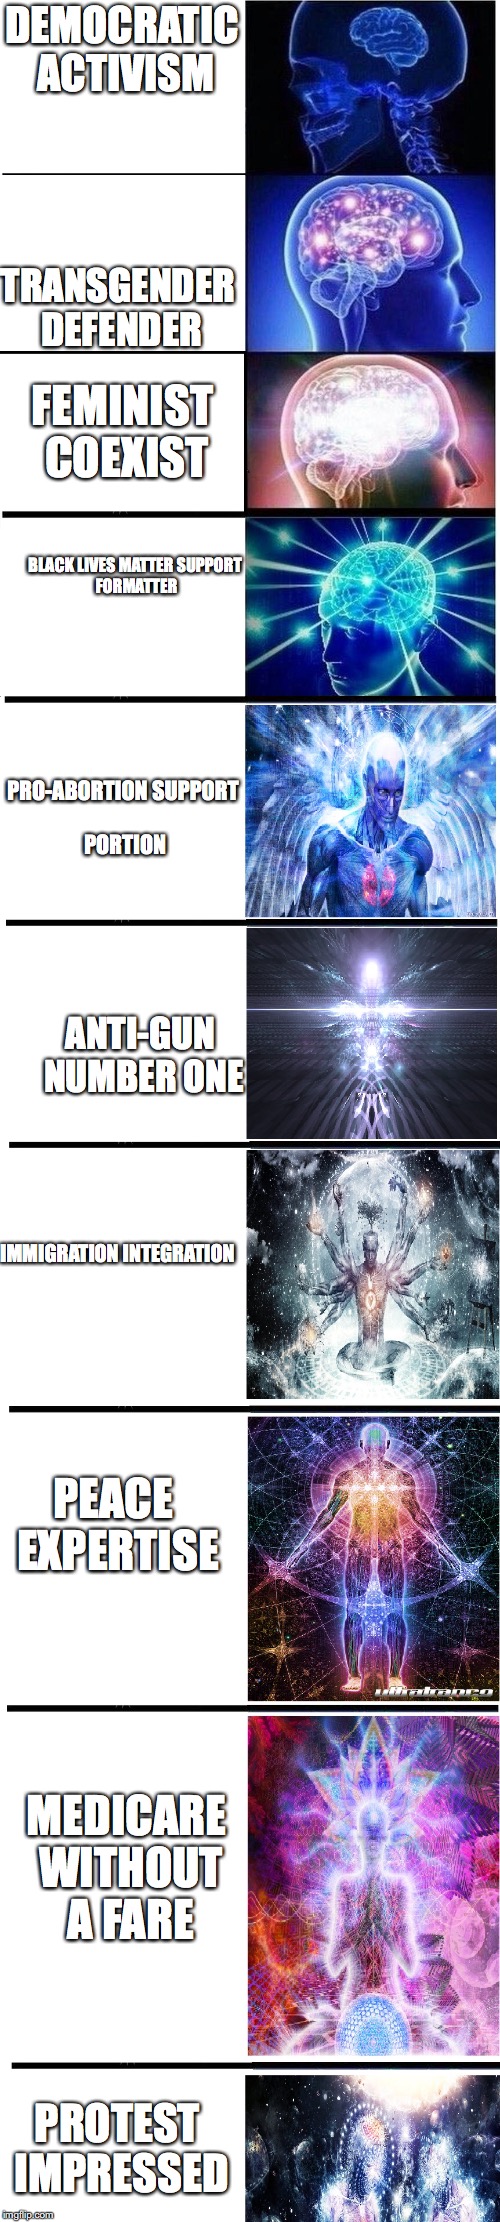 Expanding brain meme | DEMOCRATIC ACTIVISM; TRANSGENDER DEFENDER; FEMINIST COEXIST; BLACK LIVES MATTER
SUPPORT FORMATTER; PRO-ABORTION
SUPPORT PORTION; ANTI-GUN NUMBER ONE; IMMIGRATION
INTEGRATION; PEACE EXPERTISE; MEDICARE WITHOUT A FARE; PROTEST IMPRESSED | image tagged in expanding brain meme | made w/ Imgflip meme maker